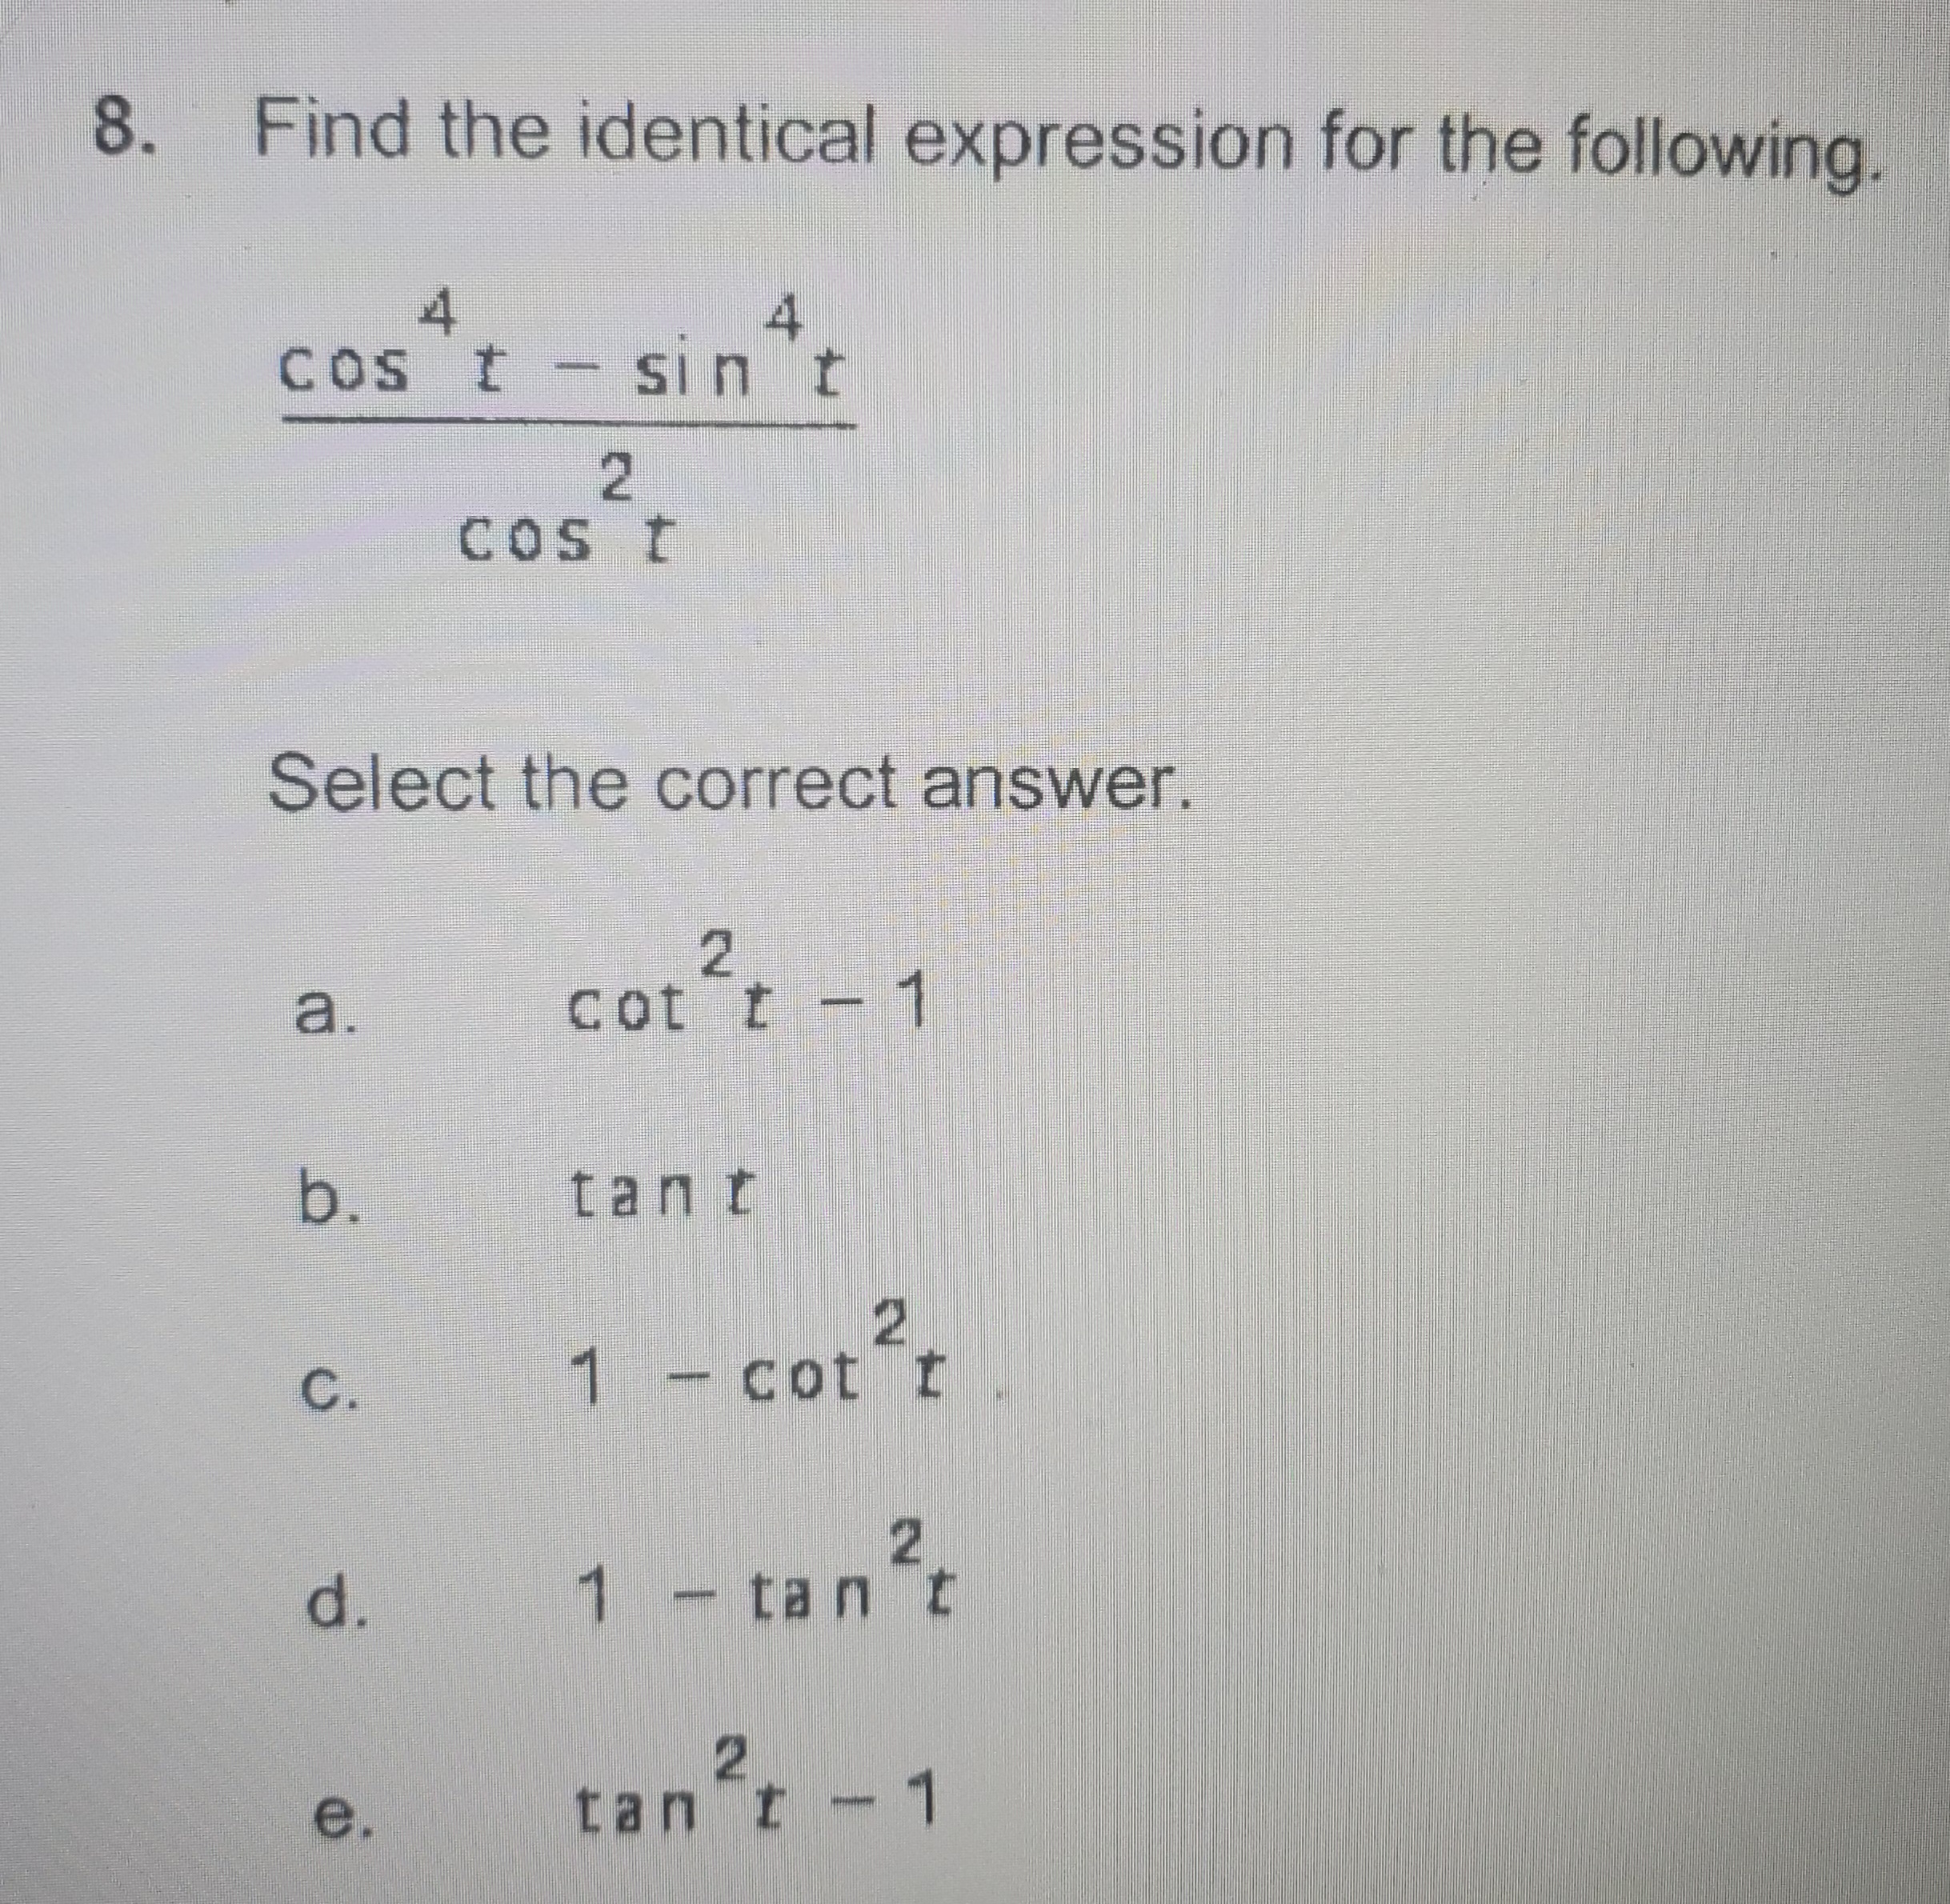 8. Find the identical expression for the following.
cos*t - sin*t
Cos t - sin 't
COS t
Select the correct answer.
a.
cot t - 1
b.
tant
1- cot t
2.
1-tan t
tan't - 1
e.
tan t
C.
d.
